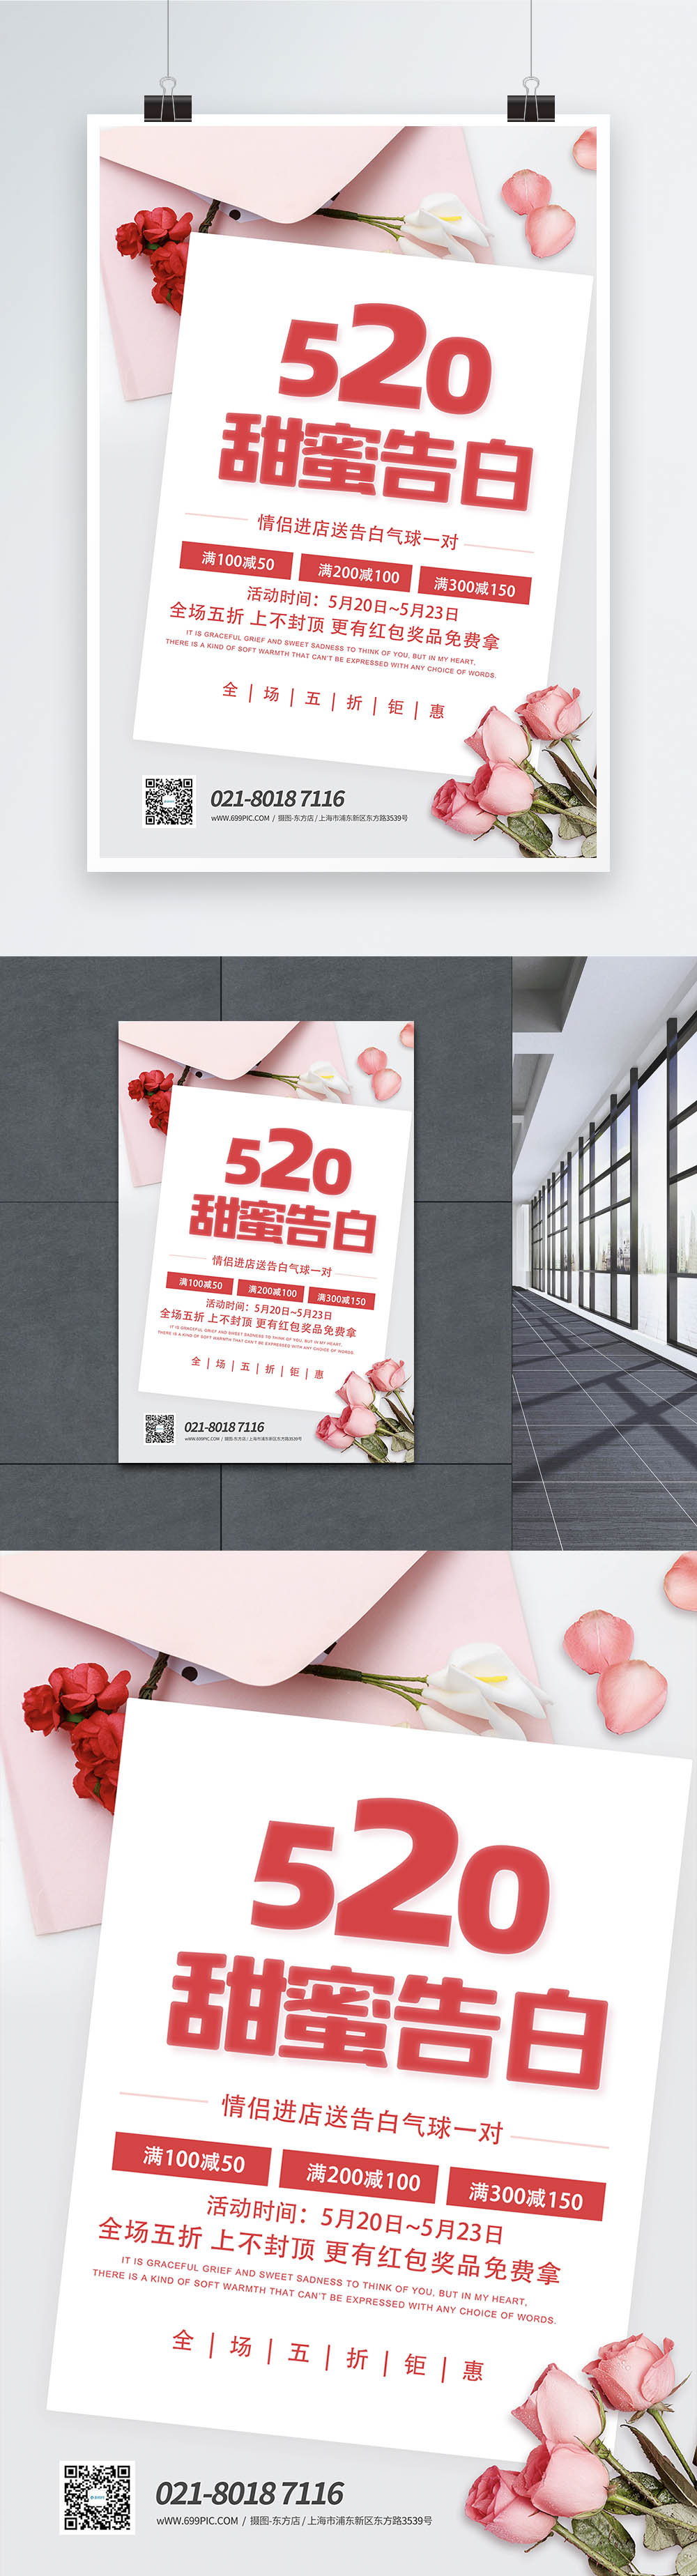 Sweet Confession 520 Event Promotion Poster Template Imagepicture Free Download 401733083